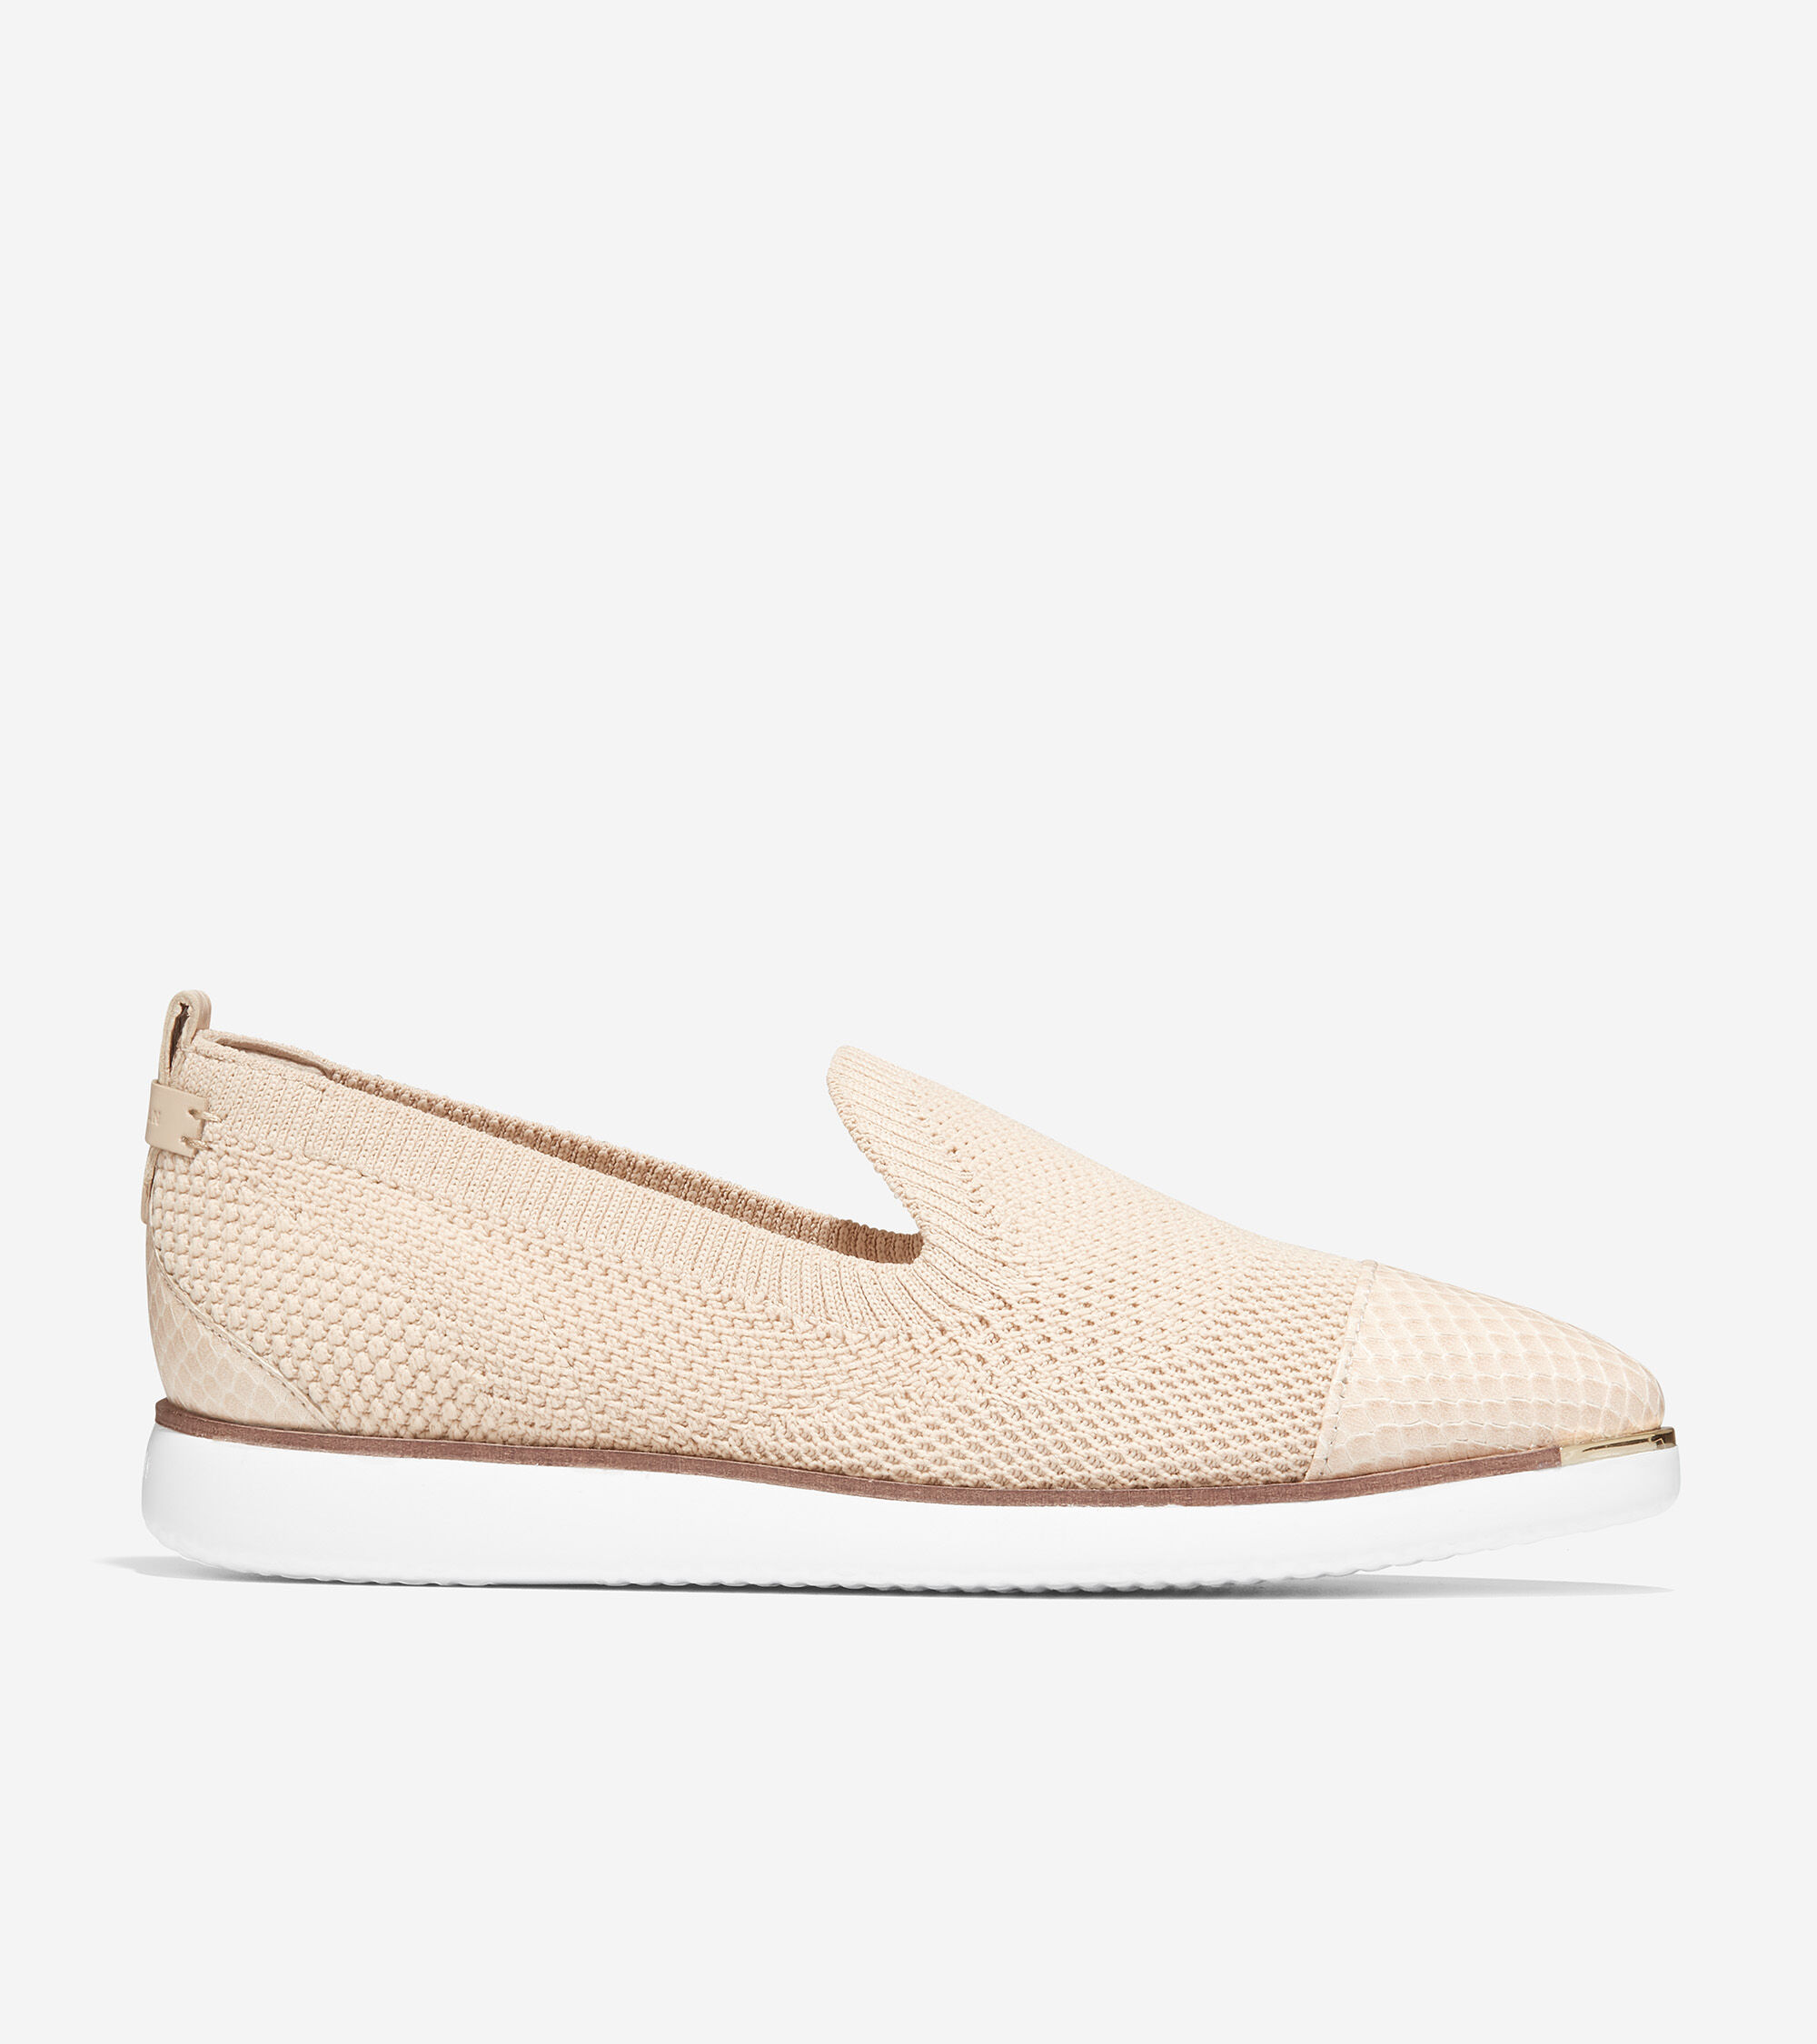 Women's Grand Ambition Slip-On Loafer in Oat Stitchlite™ | Cole Haan